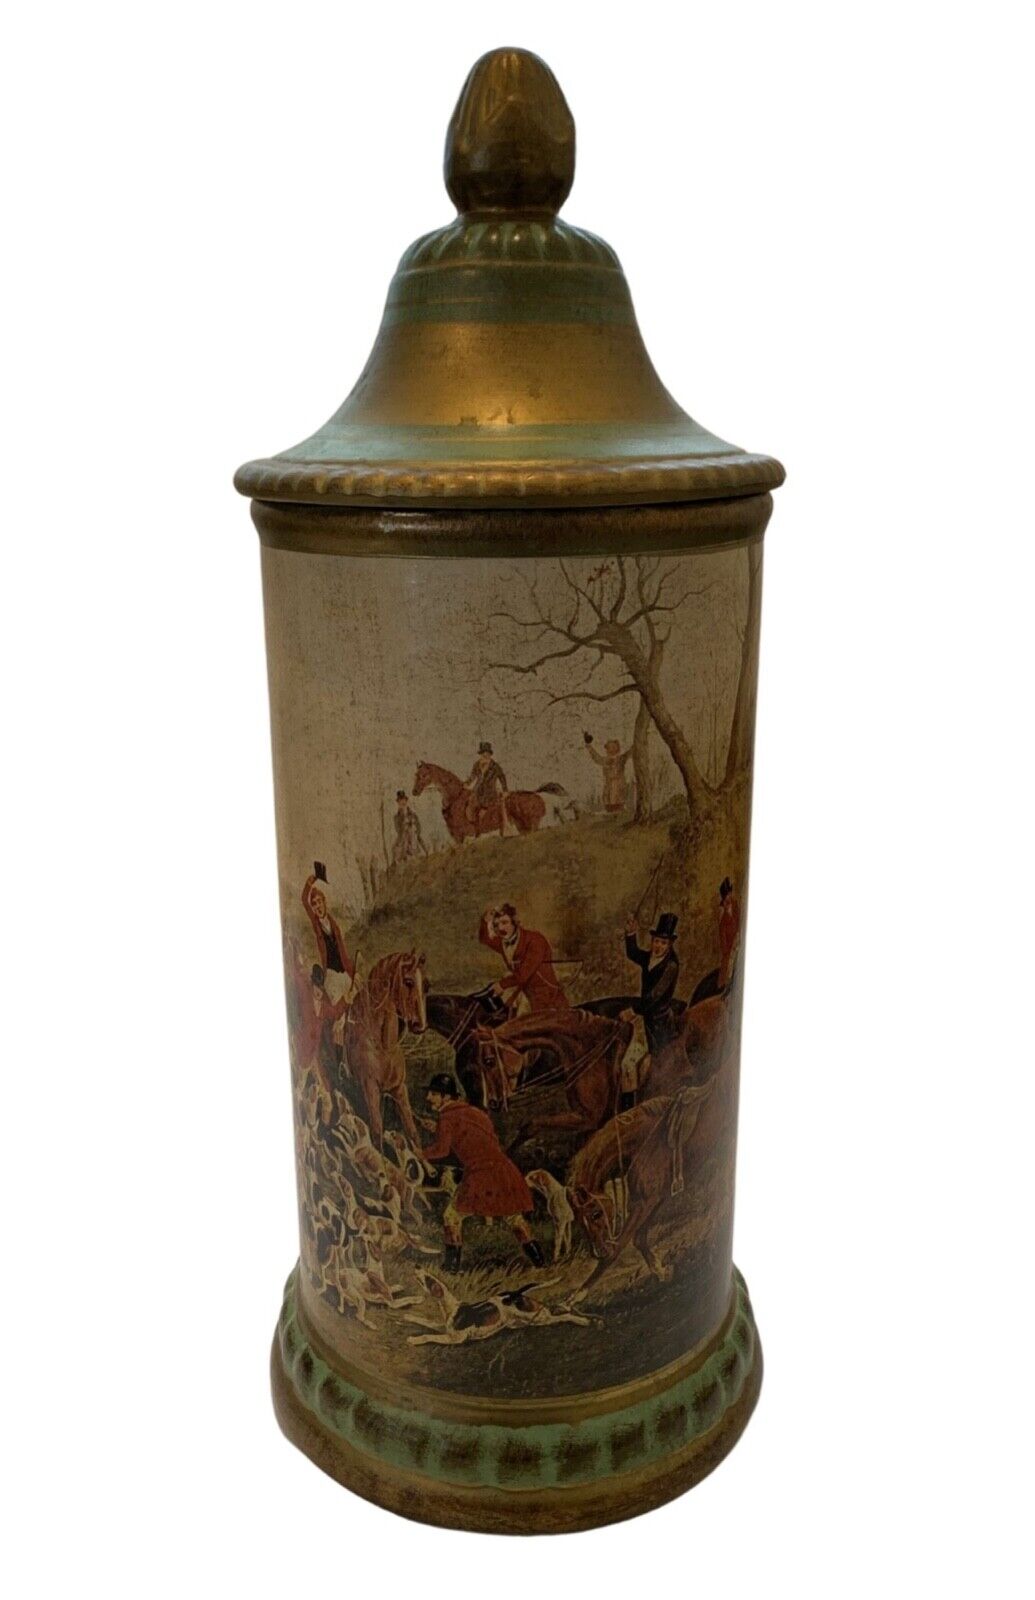 Cigar Canister by Comoy's of London, Made in Italy, Hunt Scene